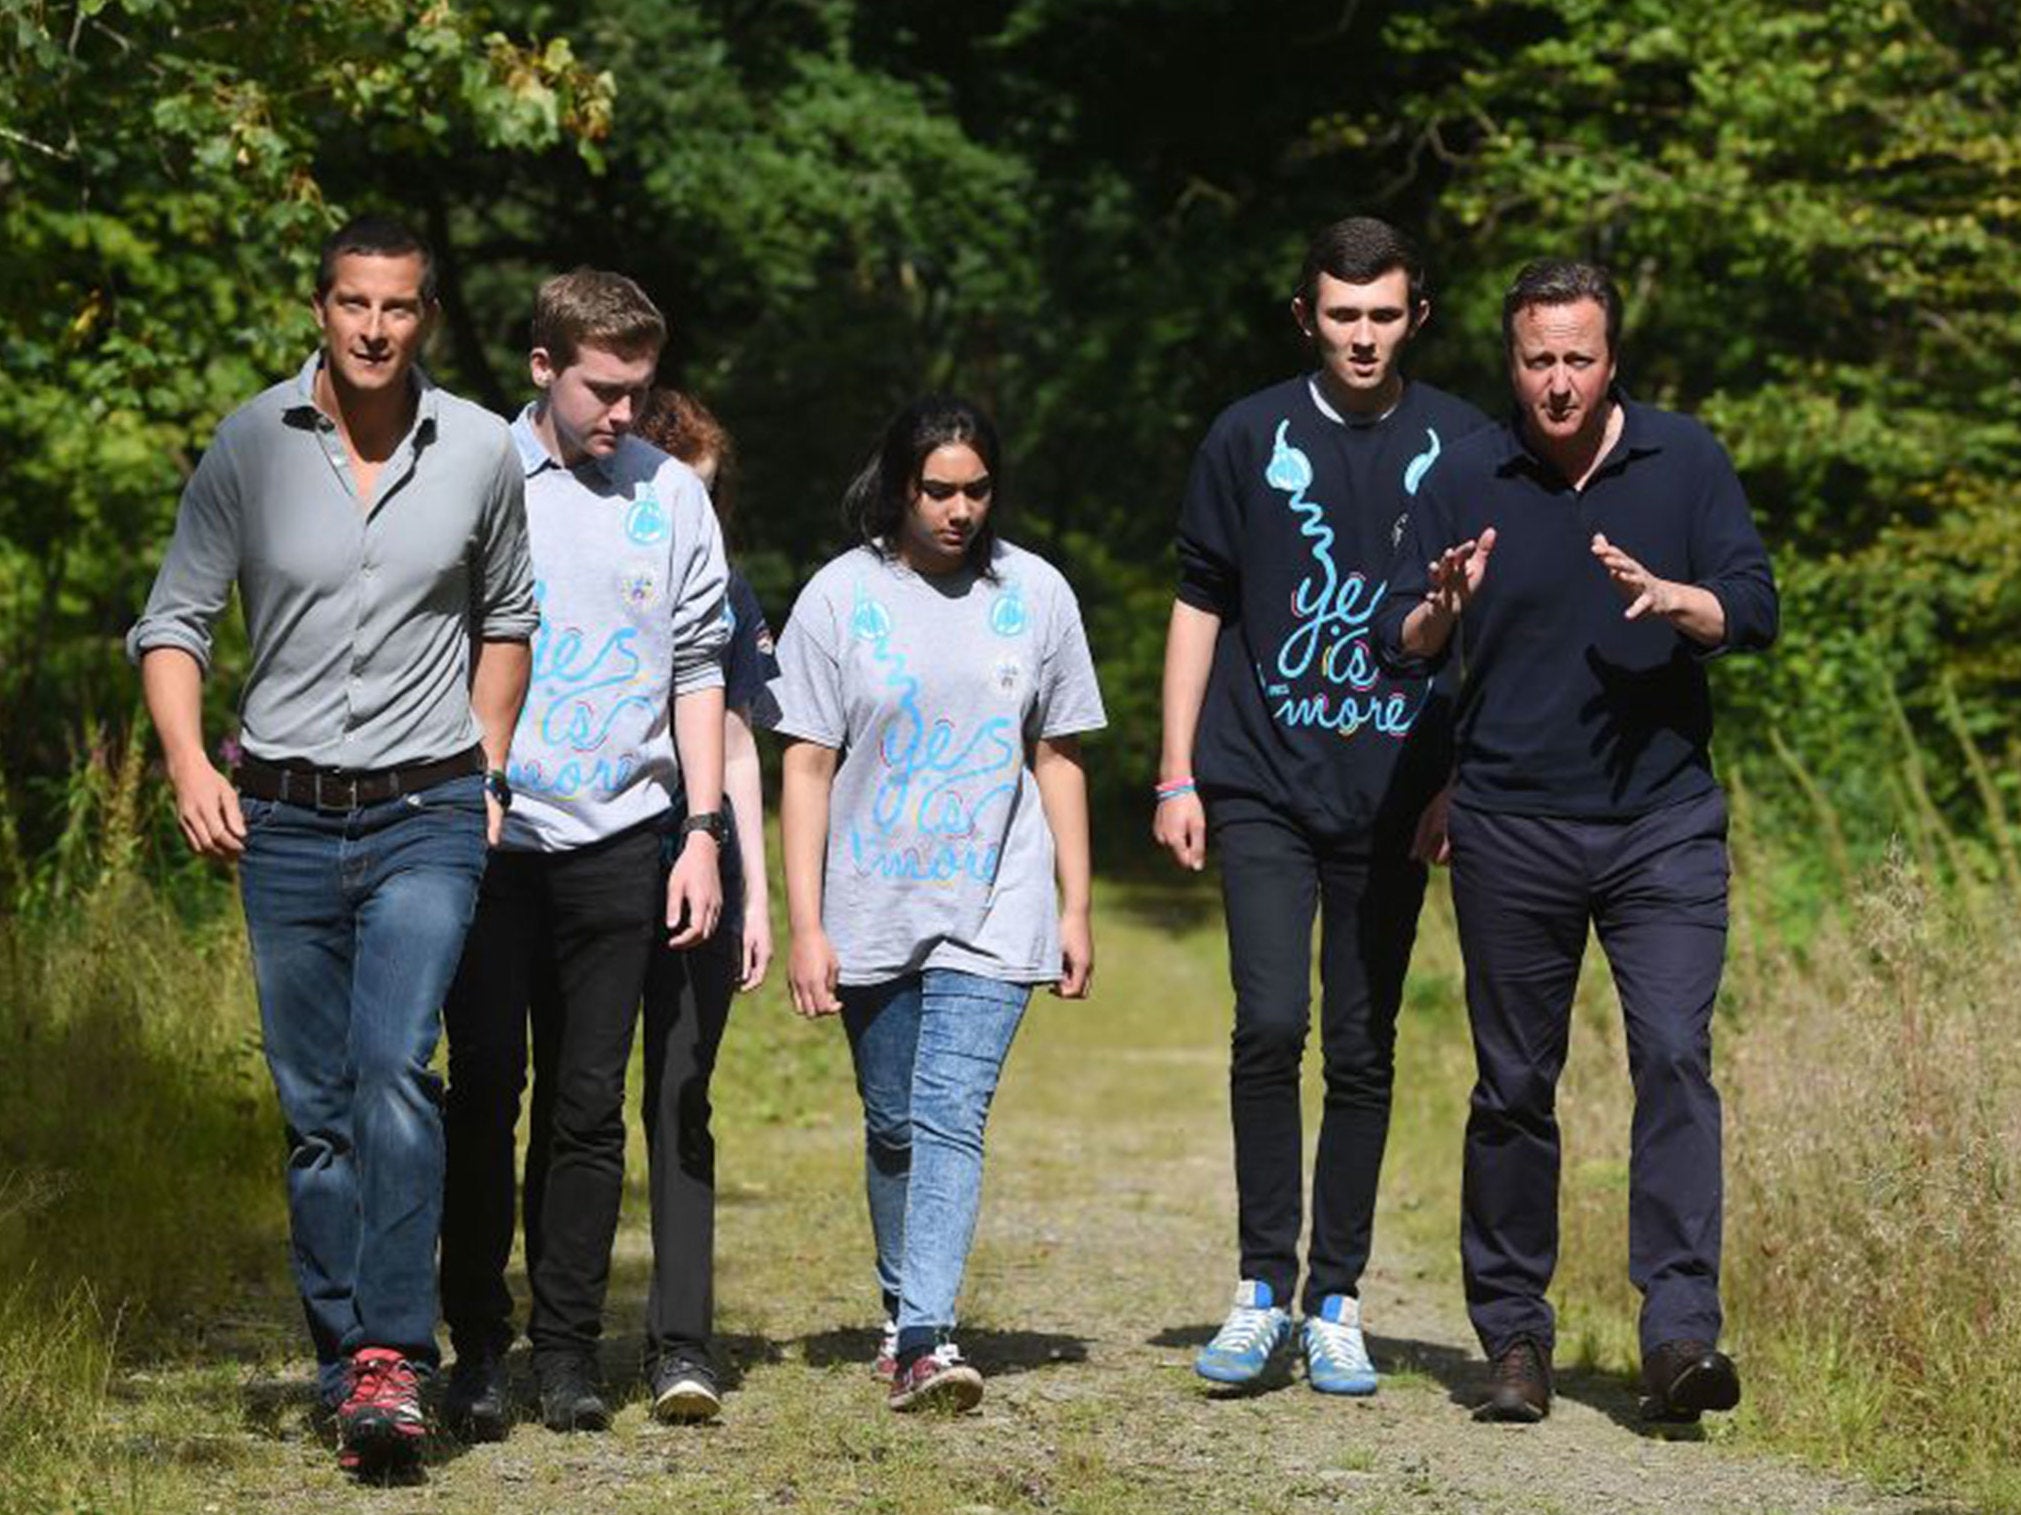 Prime Minister David Cameron (right) and survival expert Bear Grylls (left) talk to members of the National Citizen Service during a visit to Oaklands Outdoor Education Centre in Snowdonia